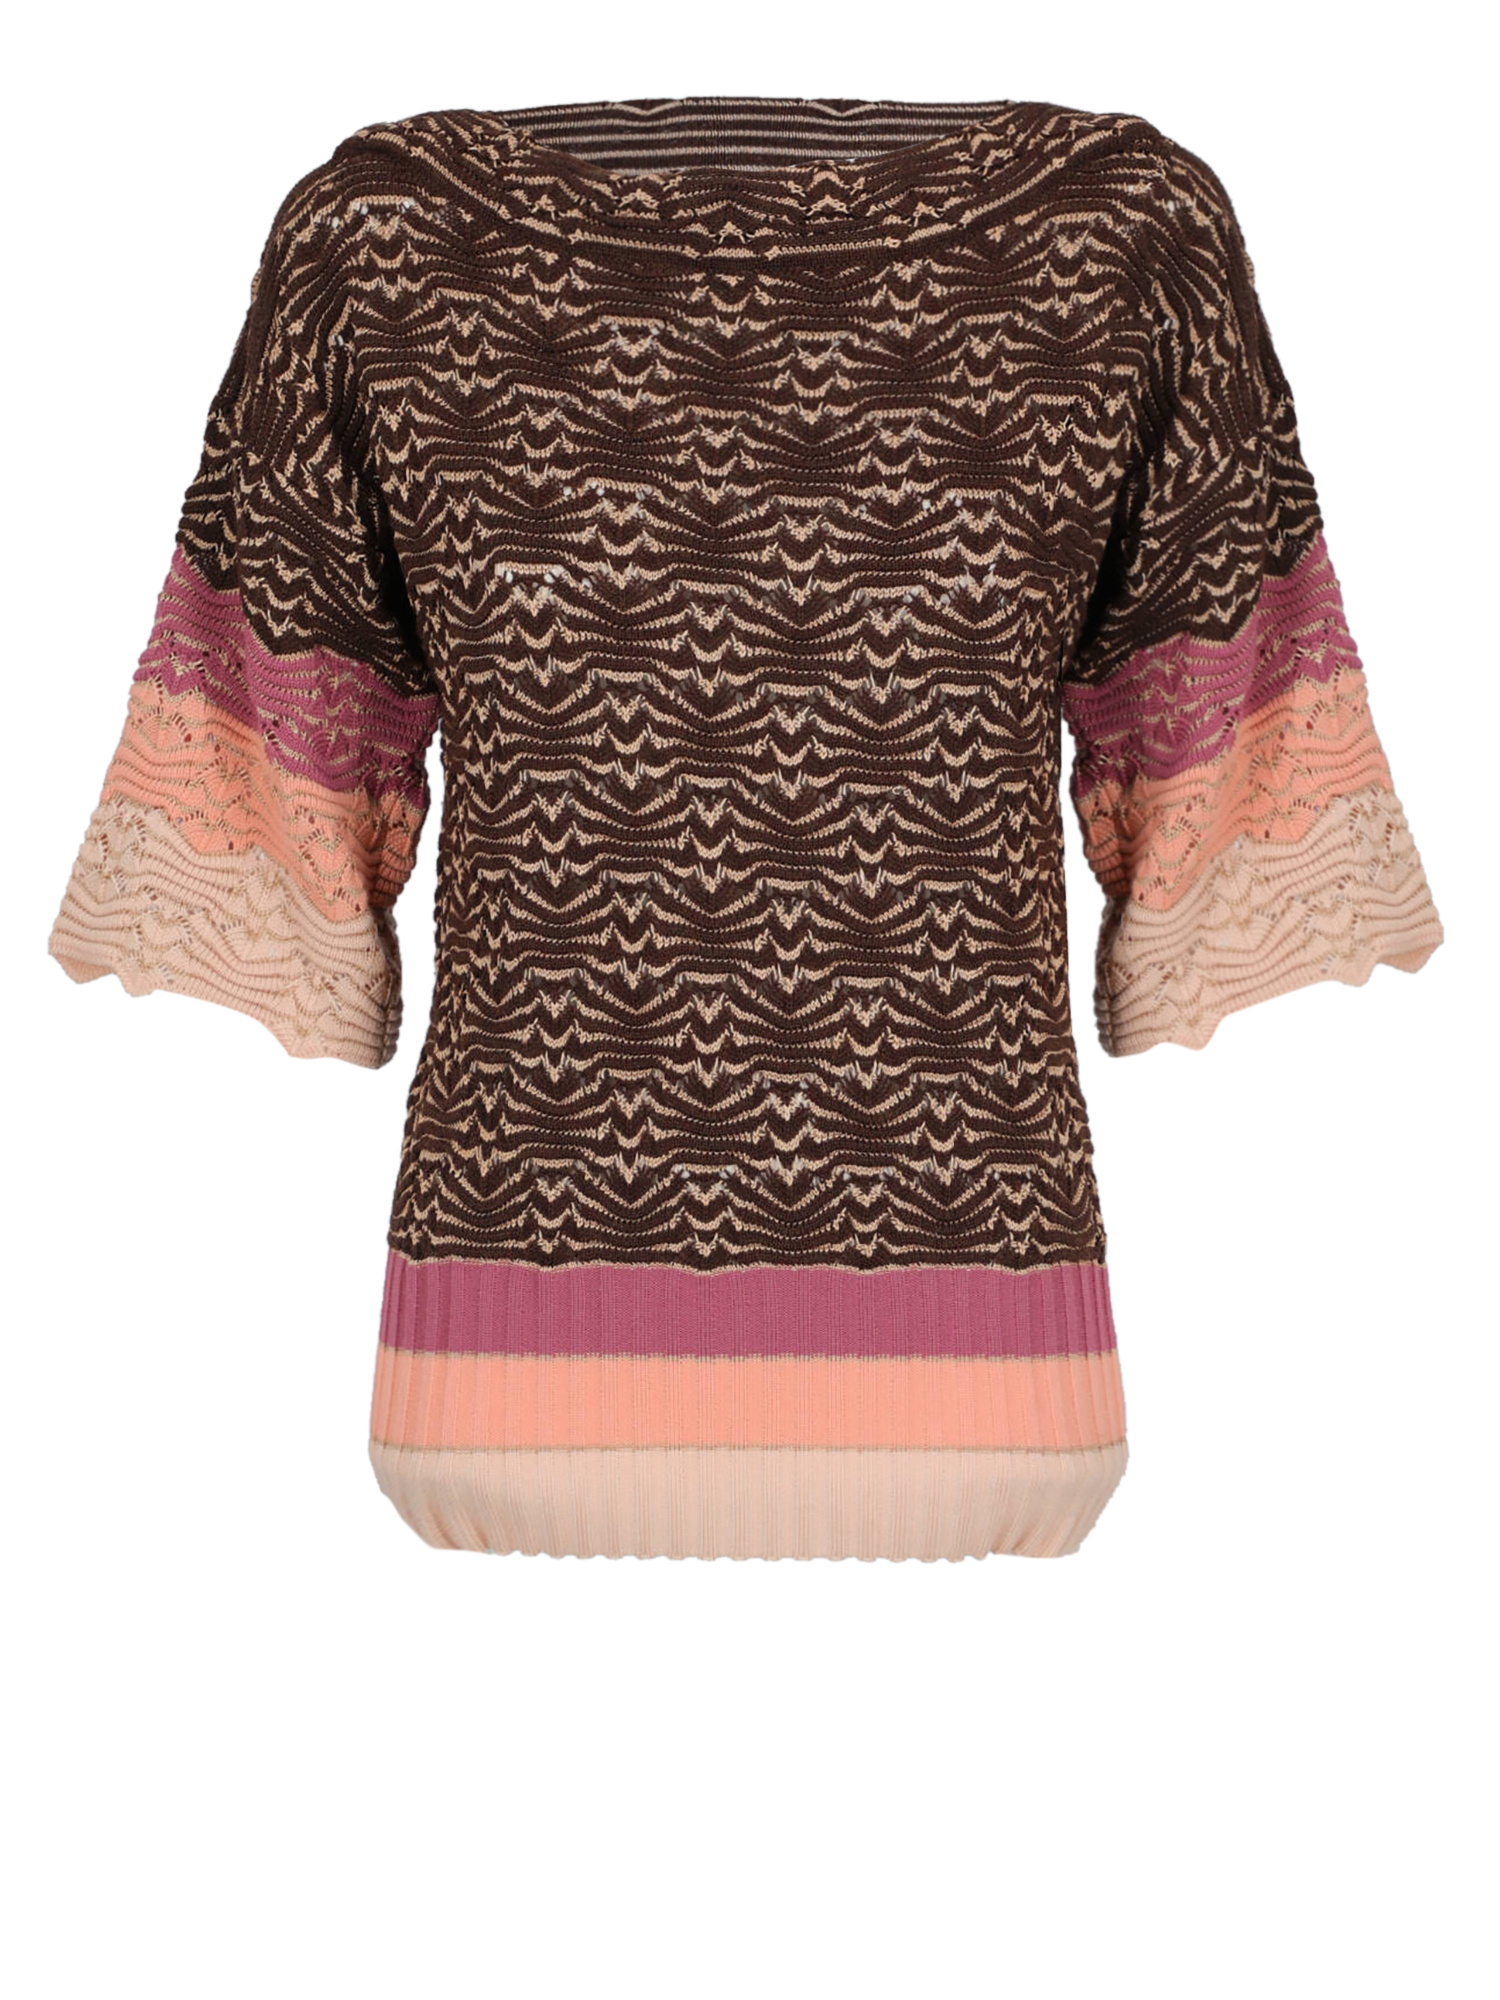 Women's T-shirts And Top - Missoni - In Brown, Pink Fabric